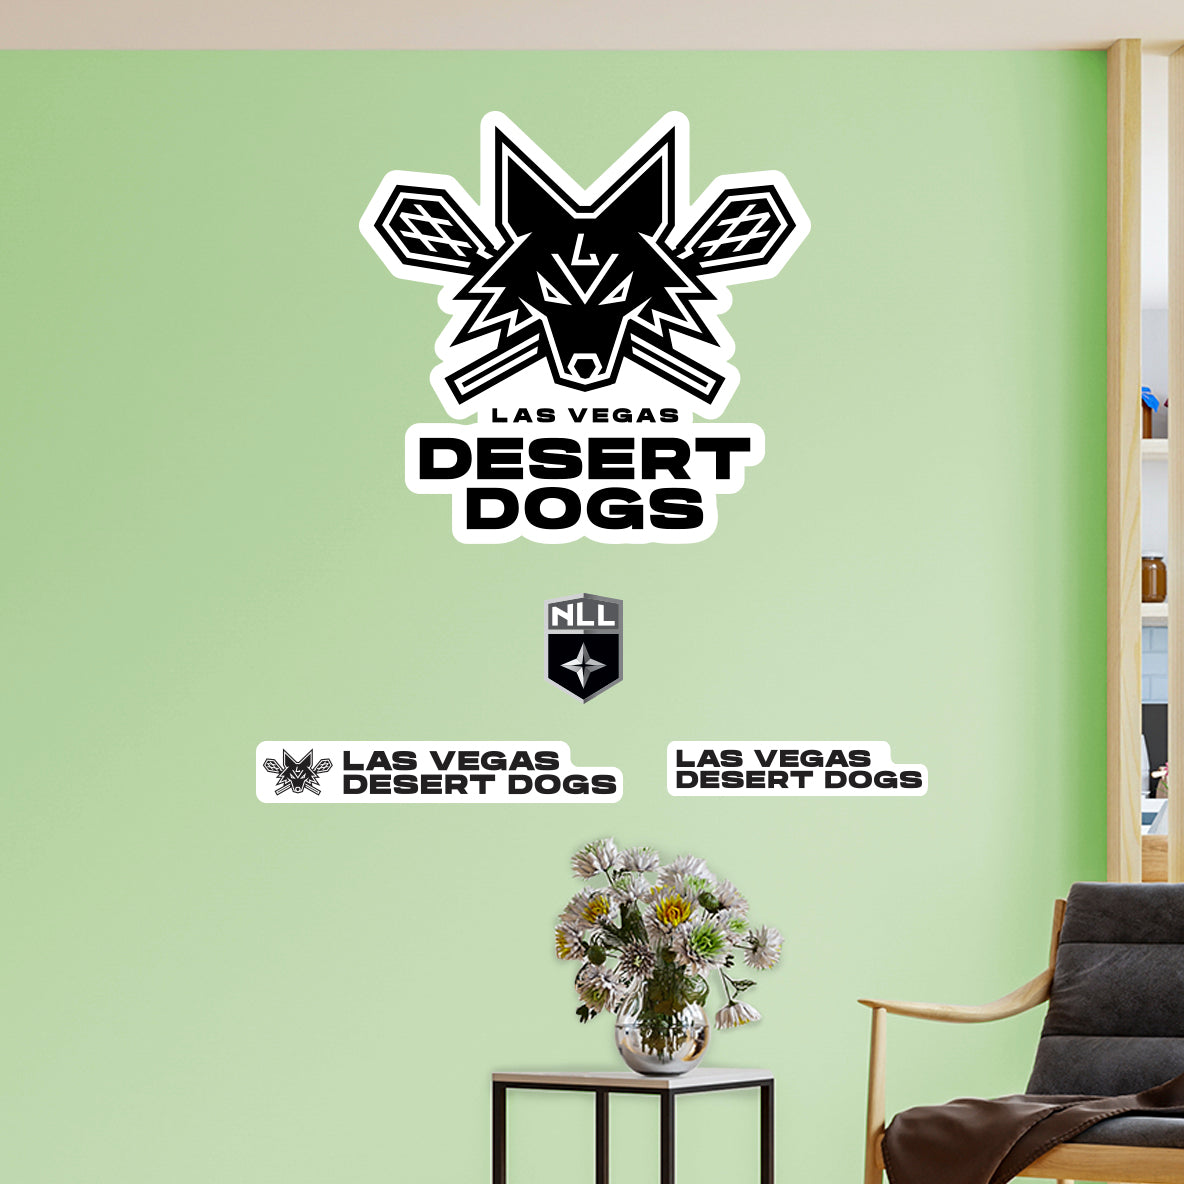 Las Vegas Desert Dogs Fathead Four-Pack Giant Logo Removable Wall Decal Set